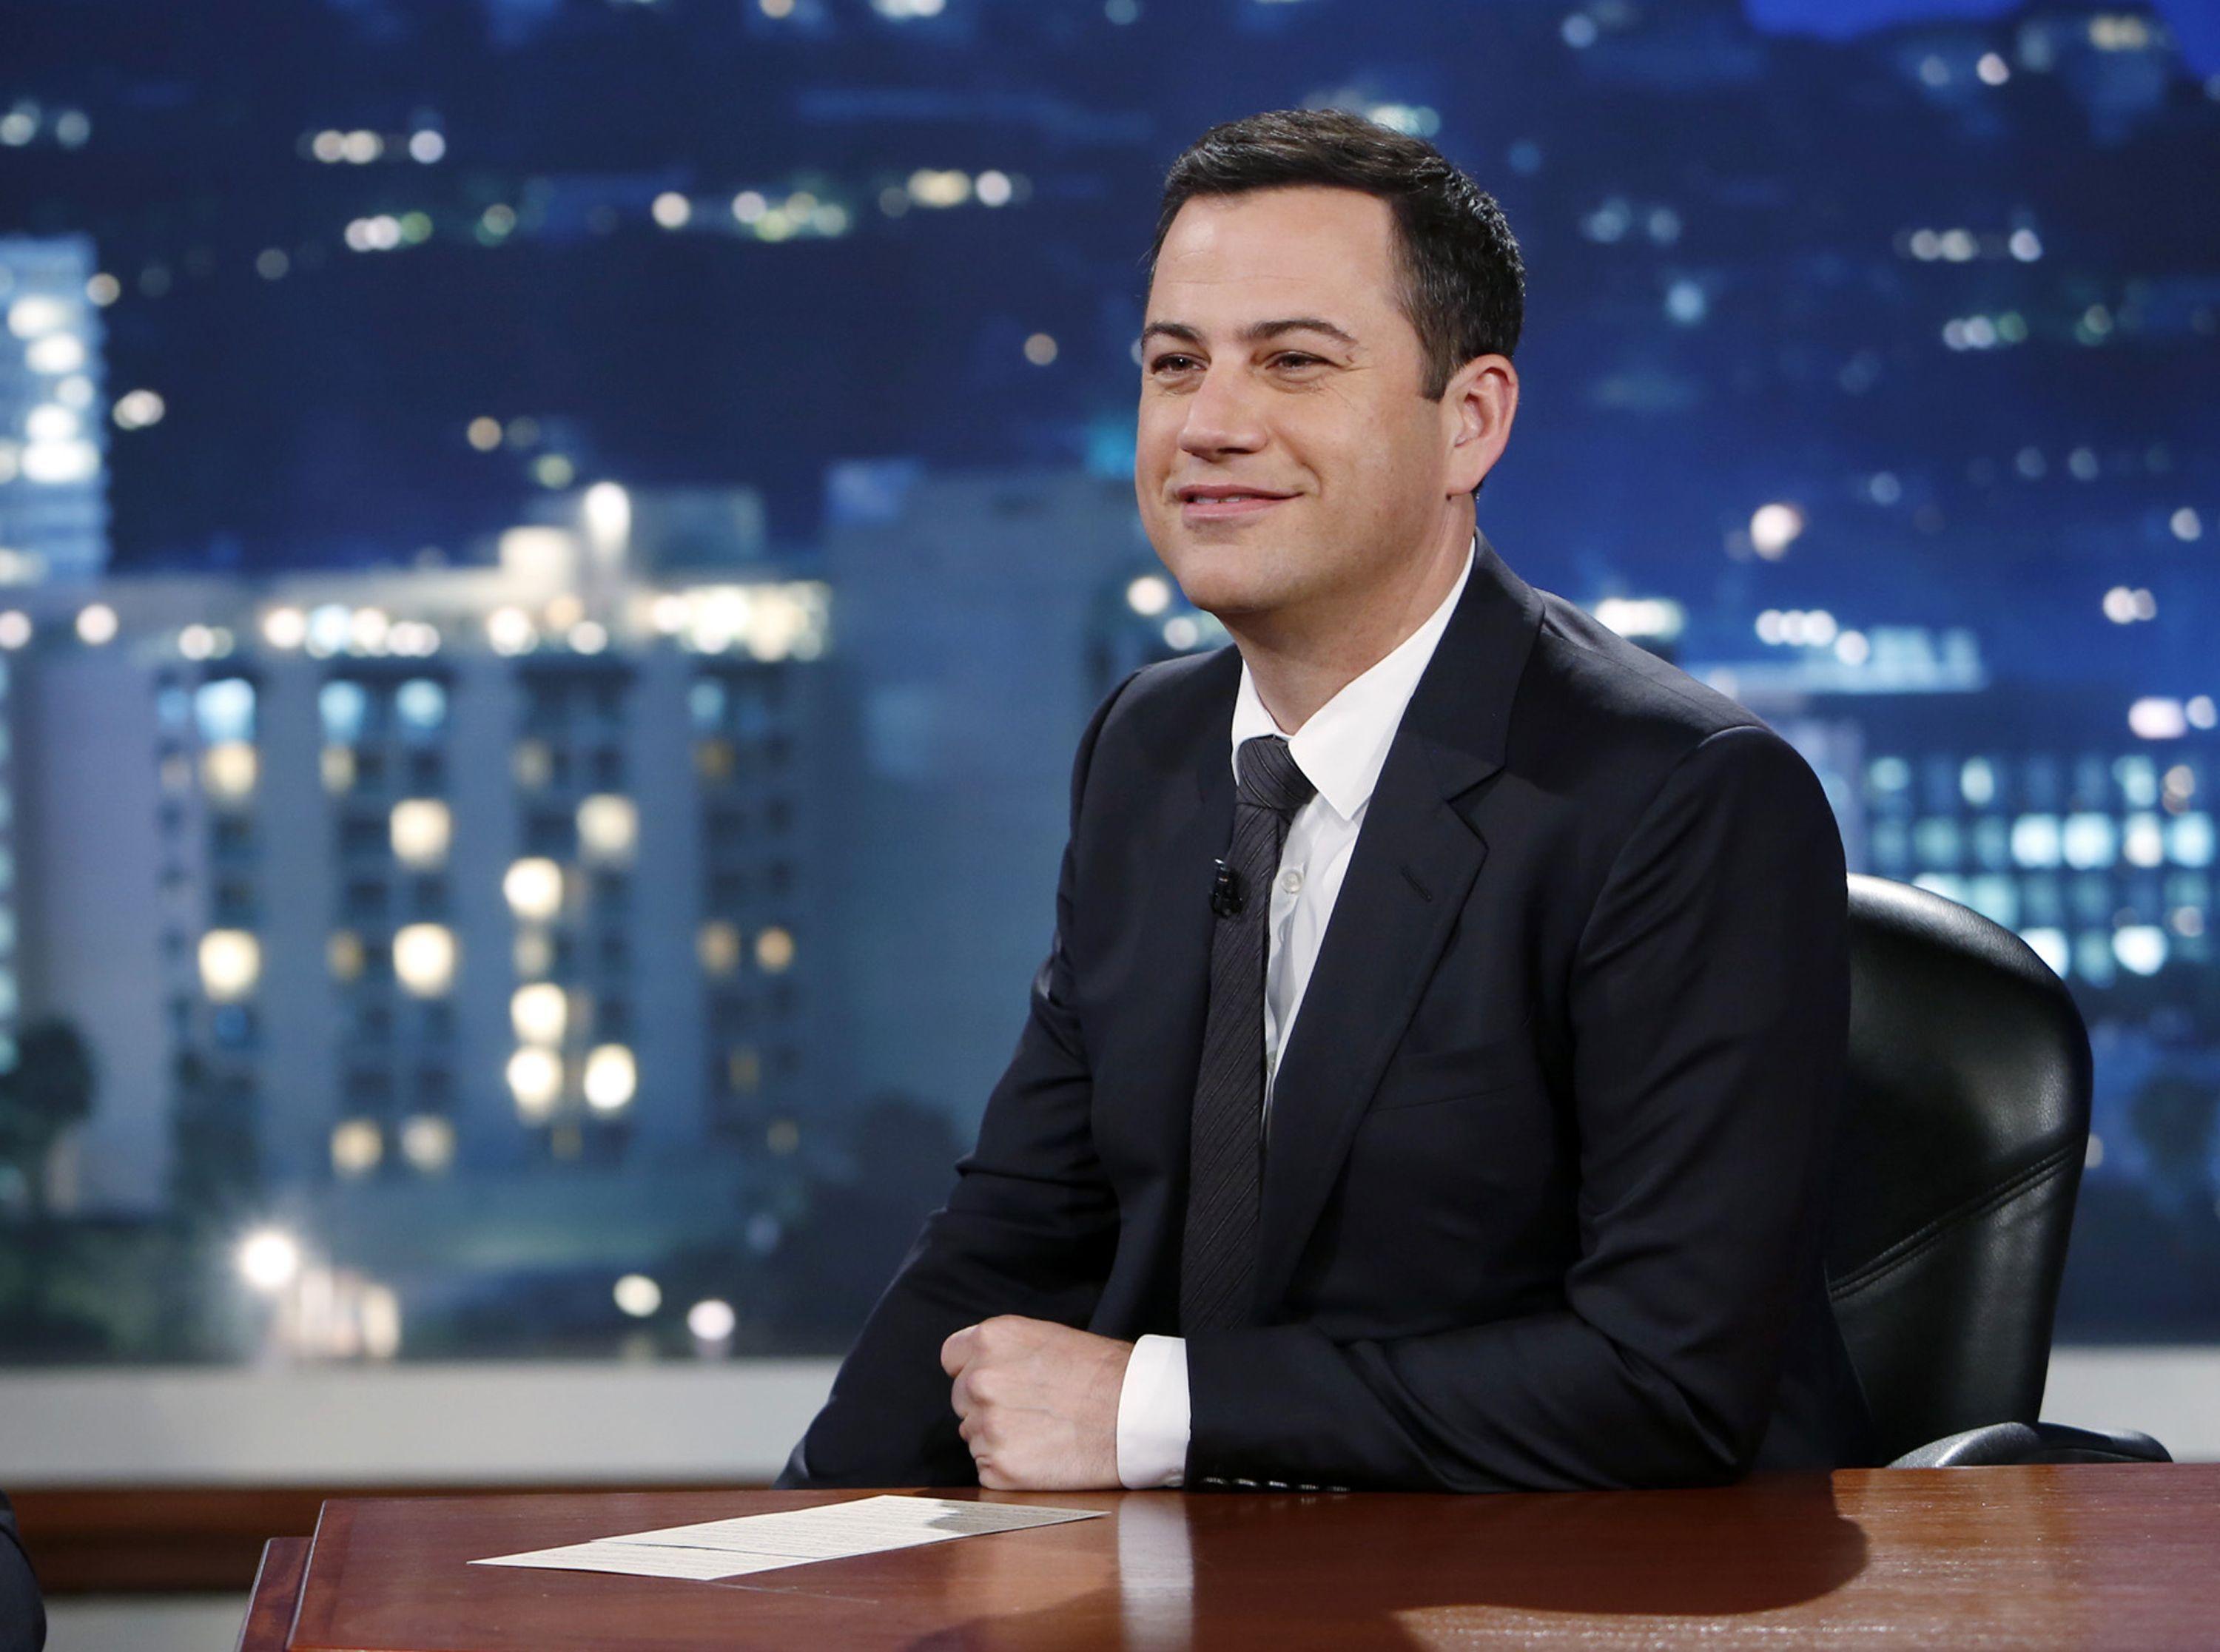 Jimmy Kimmel Wallpaper Image Photo Picture Background